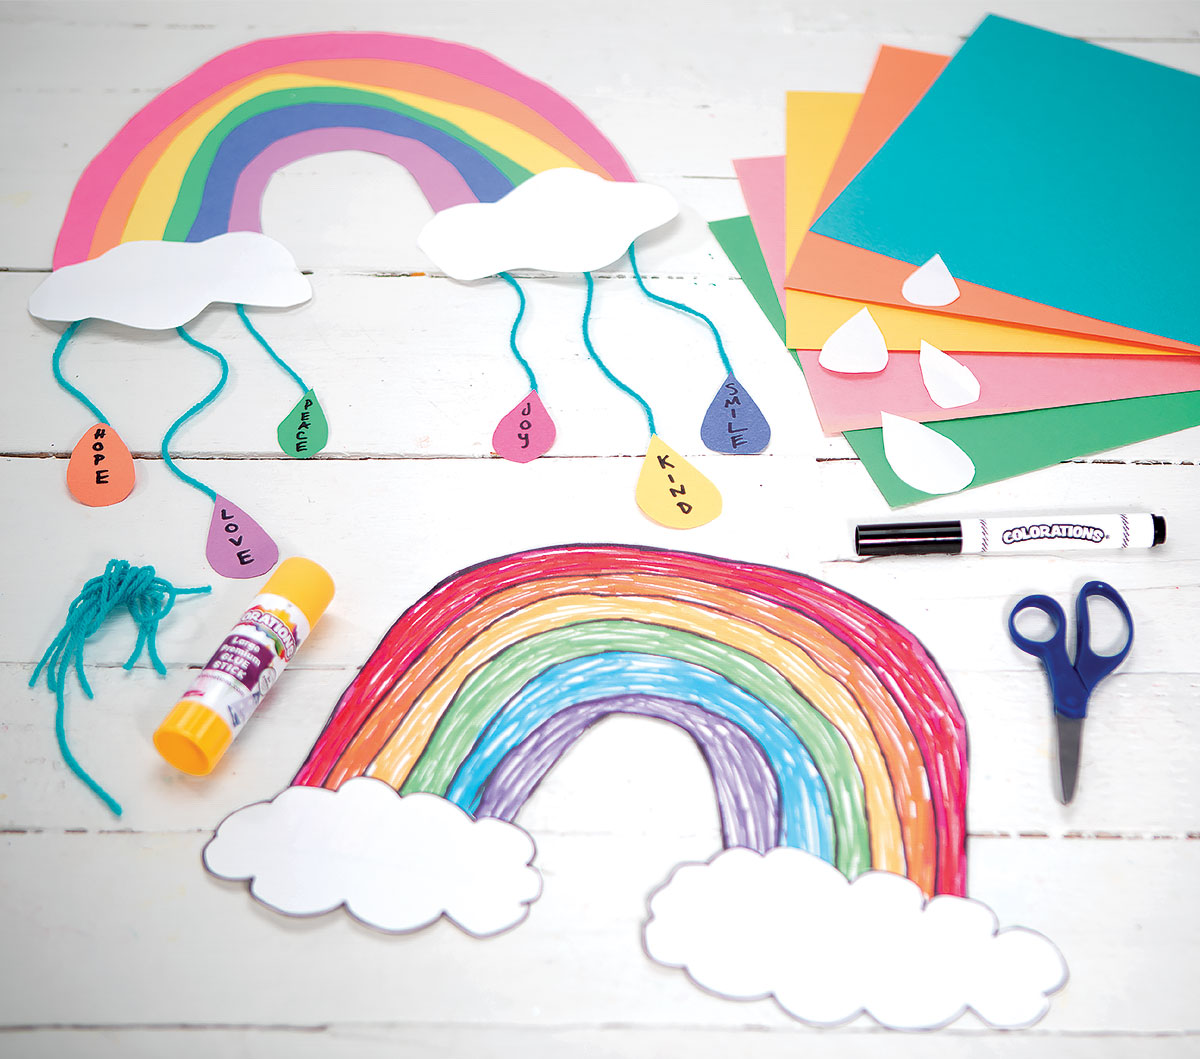 Rainbow of Kindness Mobile Creative Craft Activity for Kindness Day